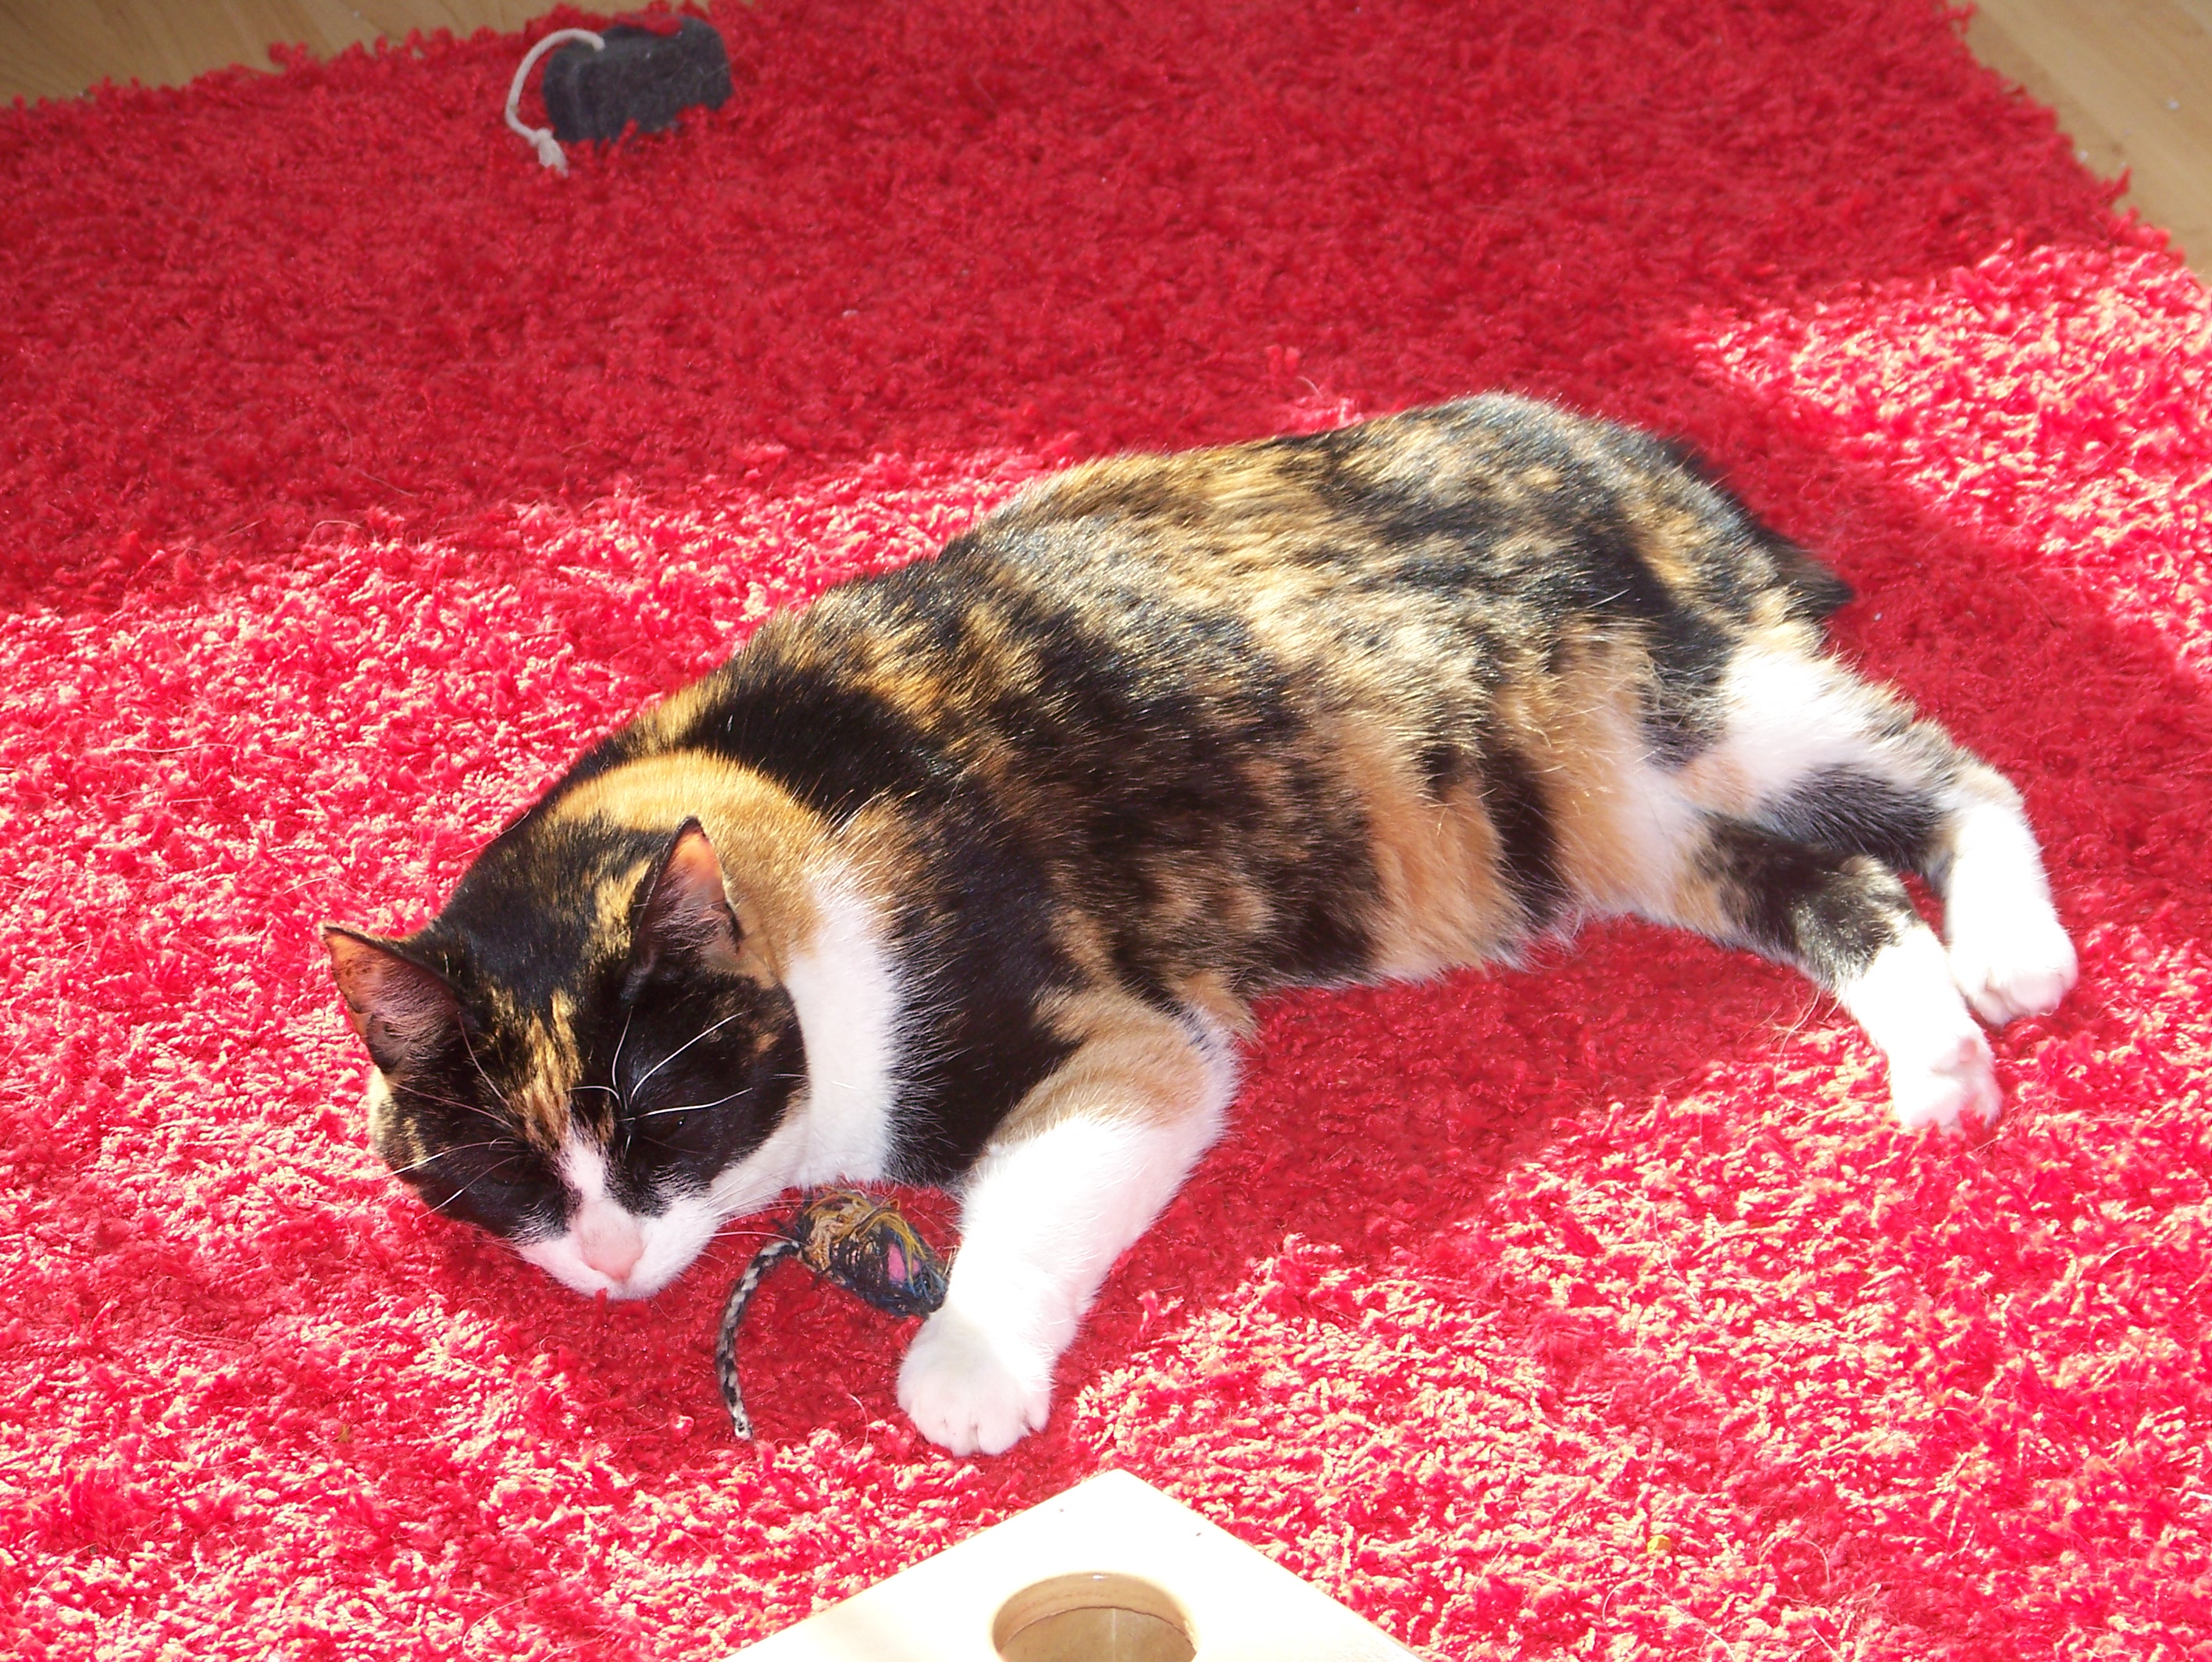 Napping in the sun with her fave mouse toy.